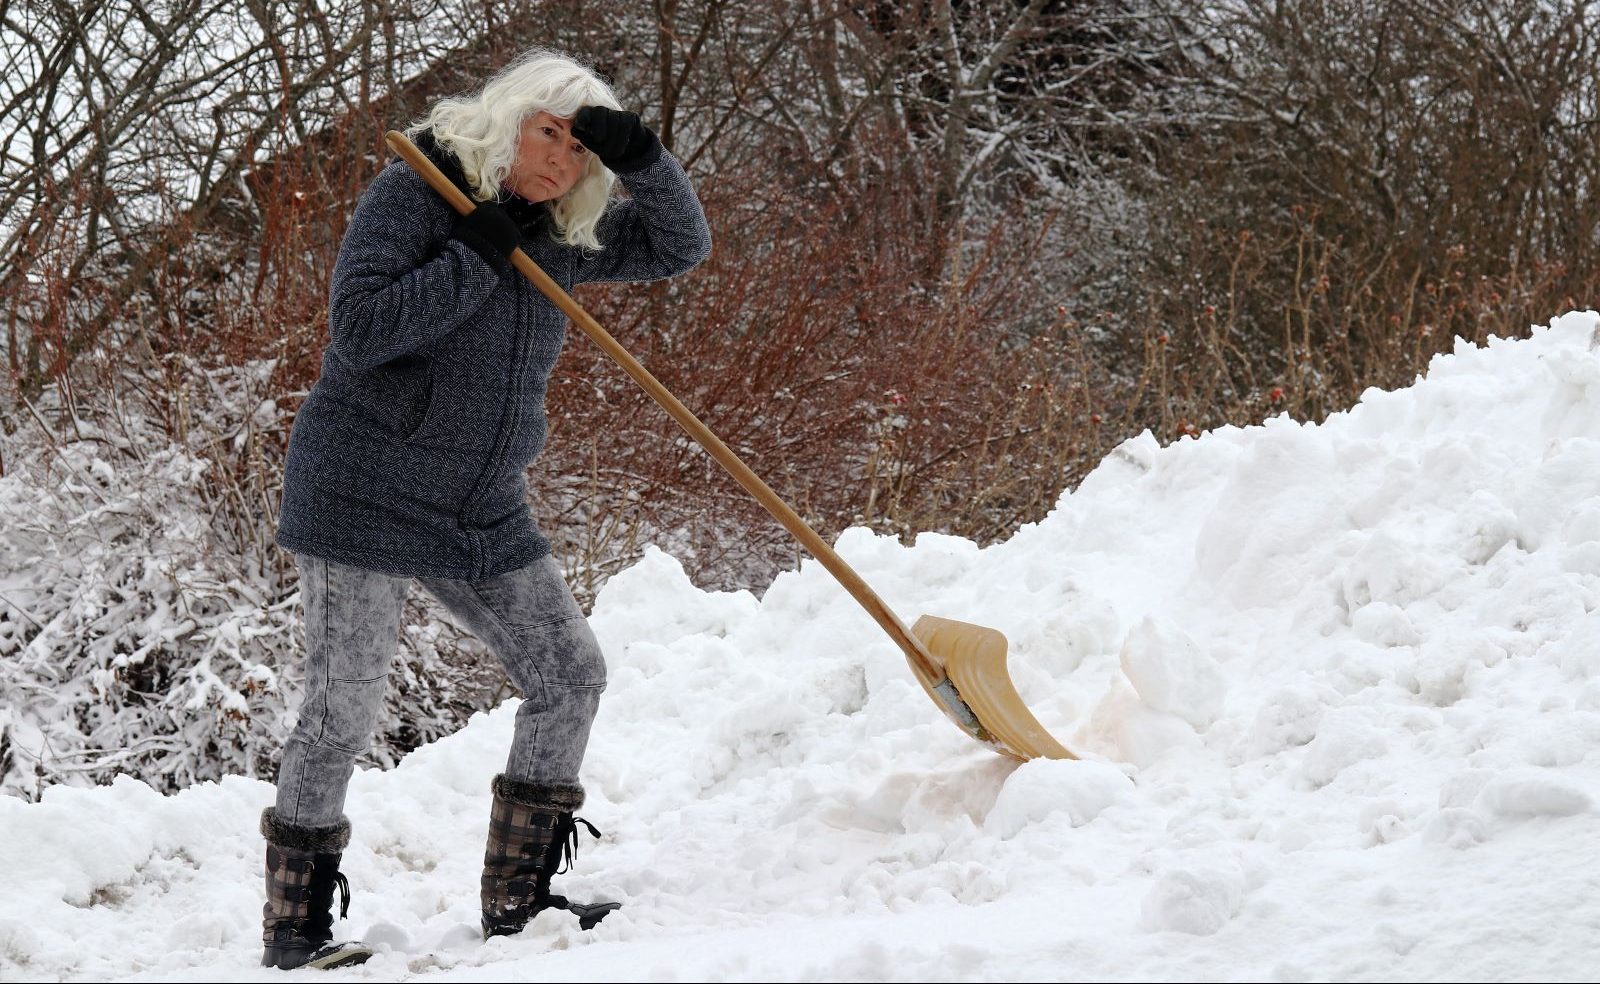 A person removes snow during the colder months.